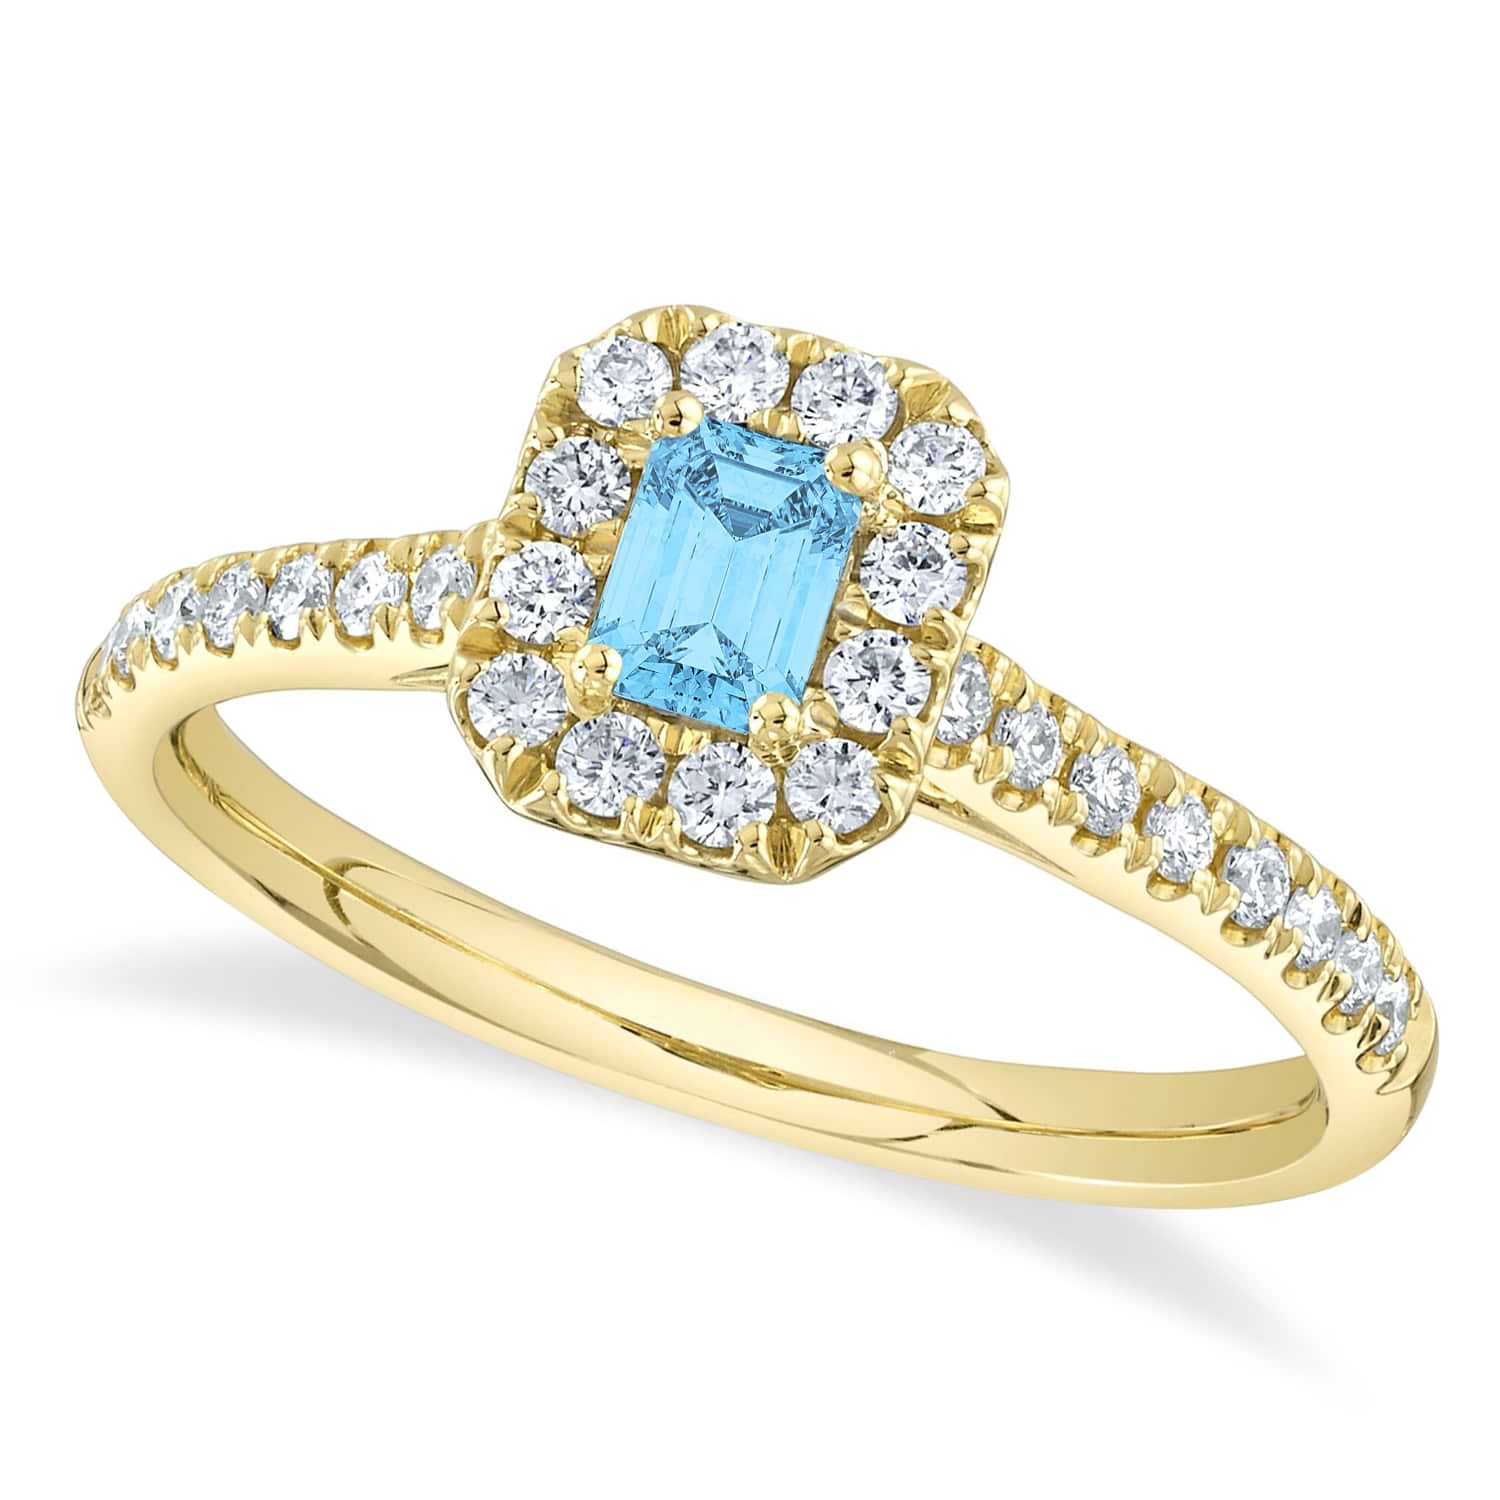 Emerald-Cut Blue Topaz Engagement Ring 14K Yellow Gold (0.69ct)